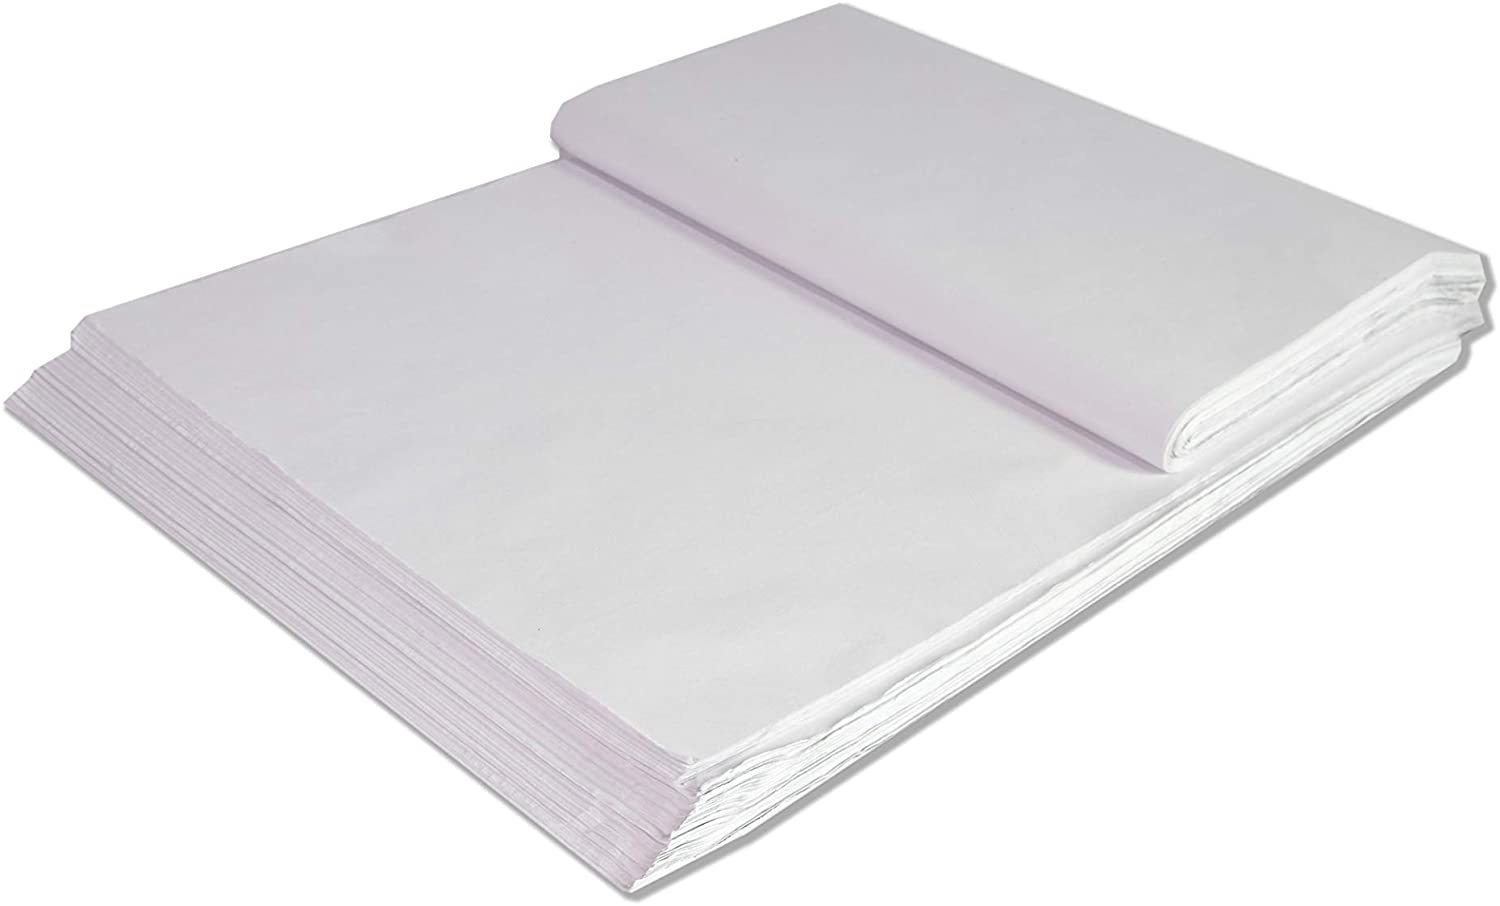 20 x 30 White Tissue Paper-2 Ream Pack, 960 Total Sheets … - Tissue Paper